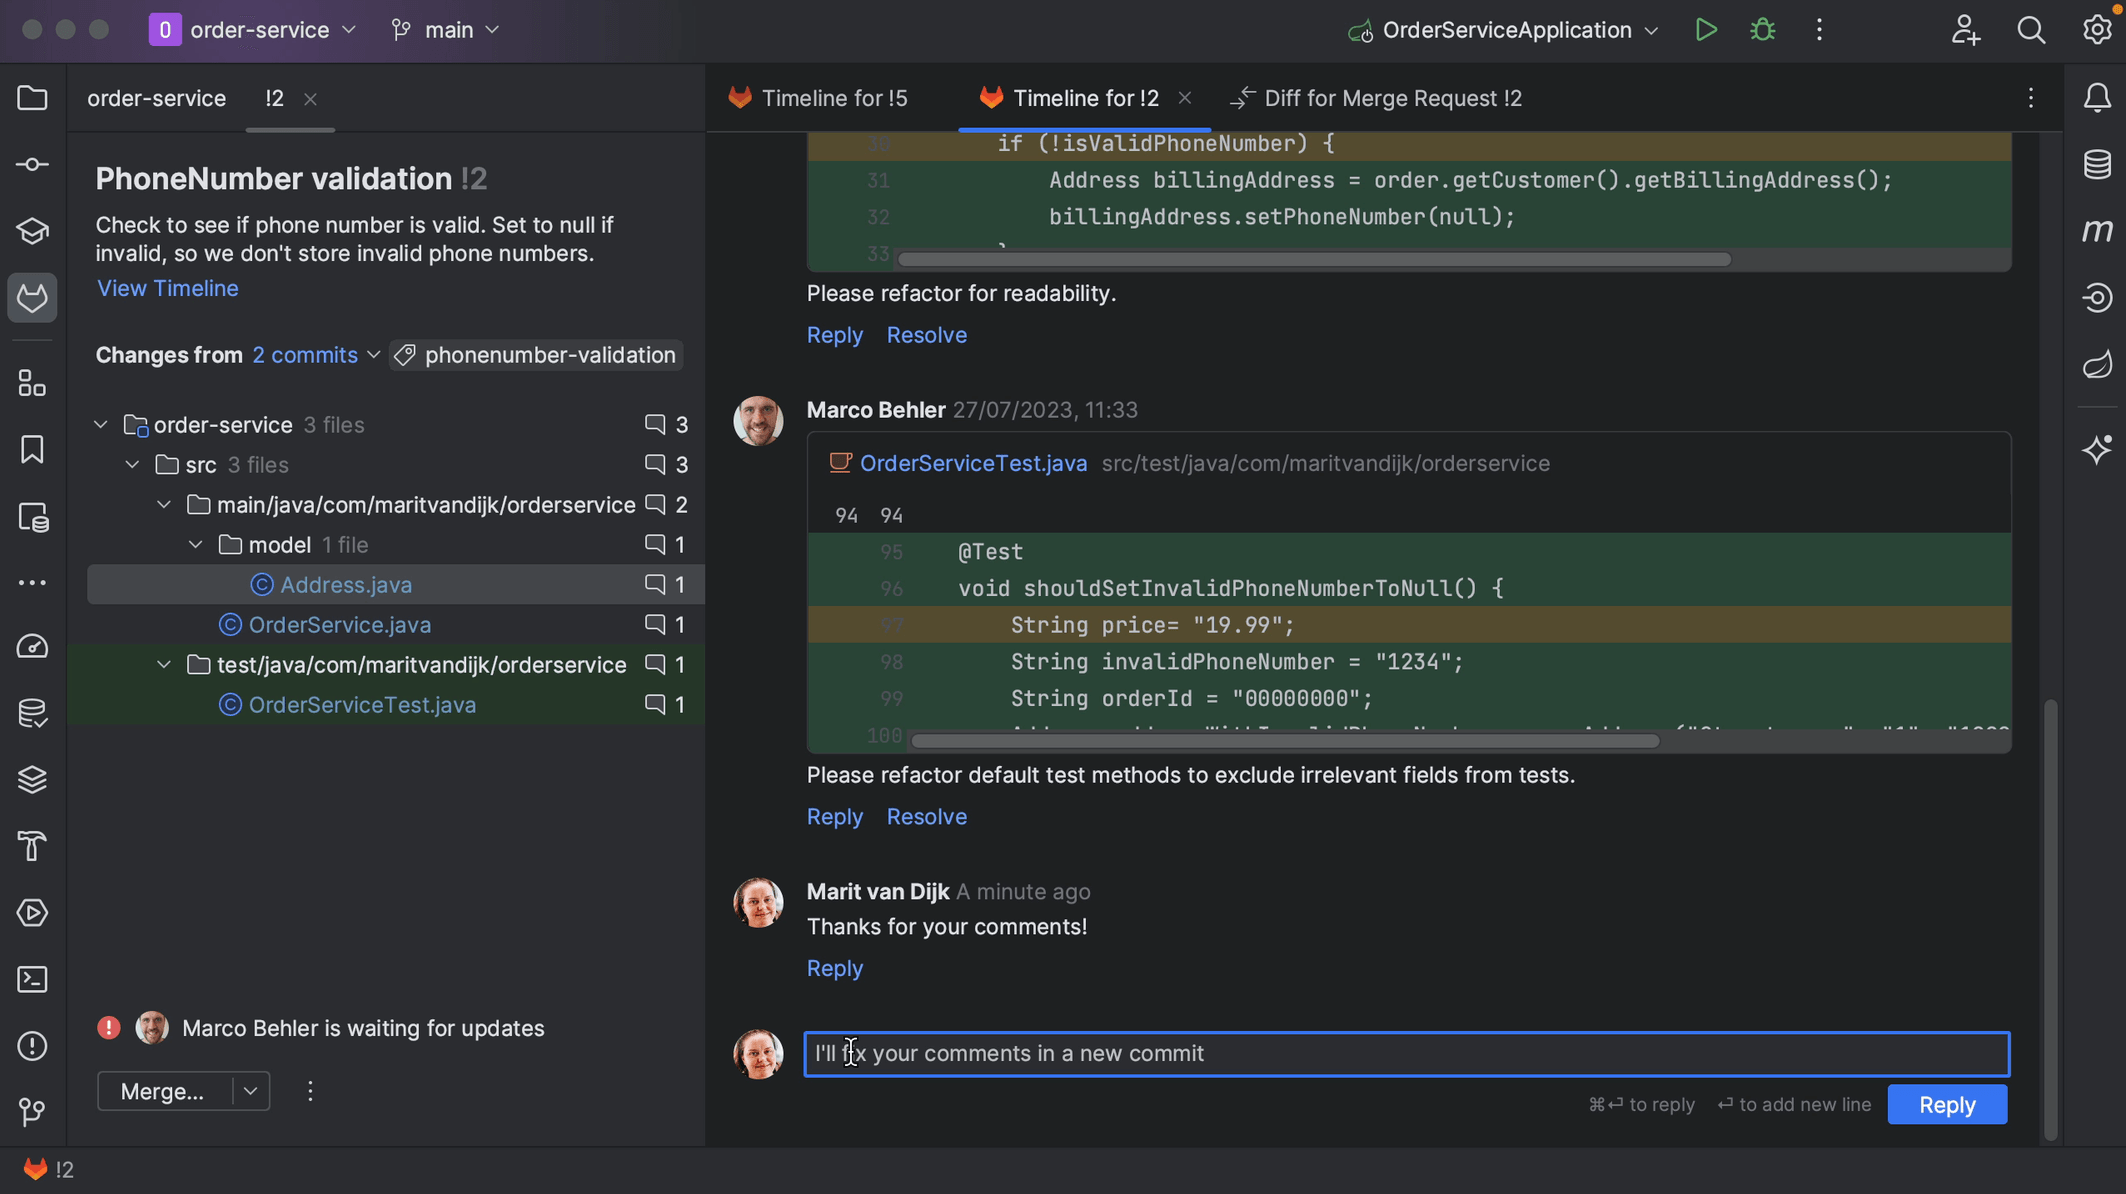 Comment from IntelliJ IDEA